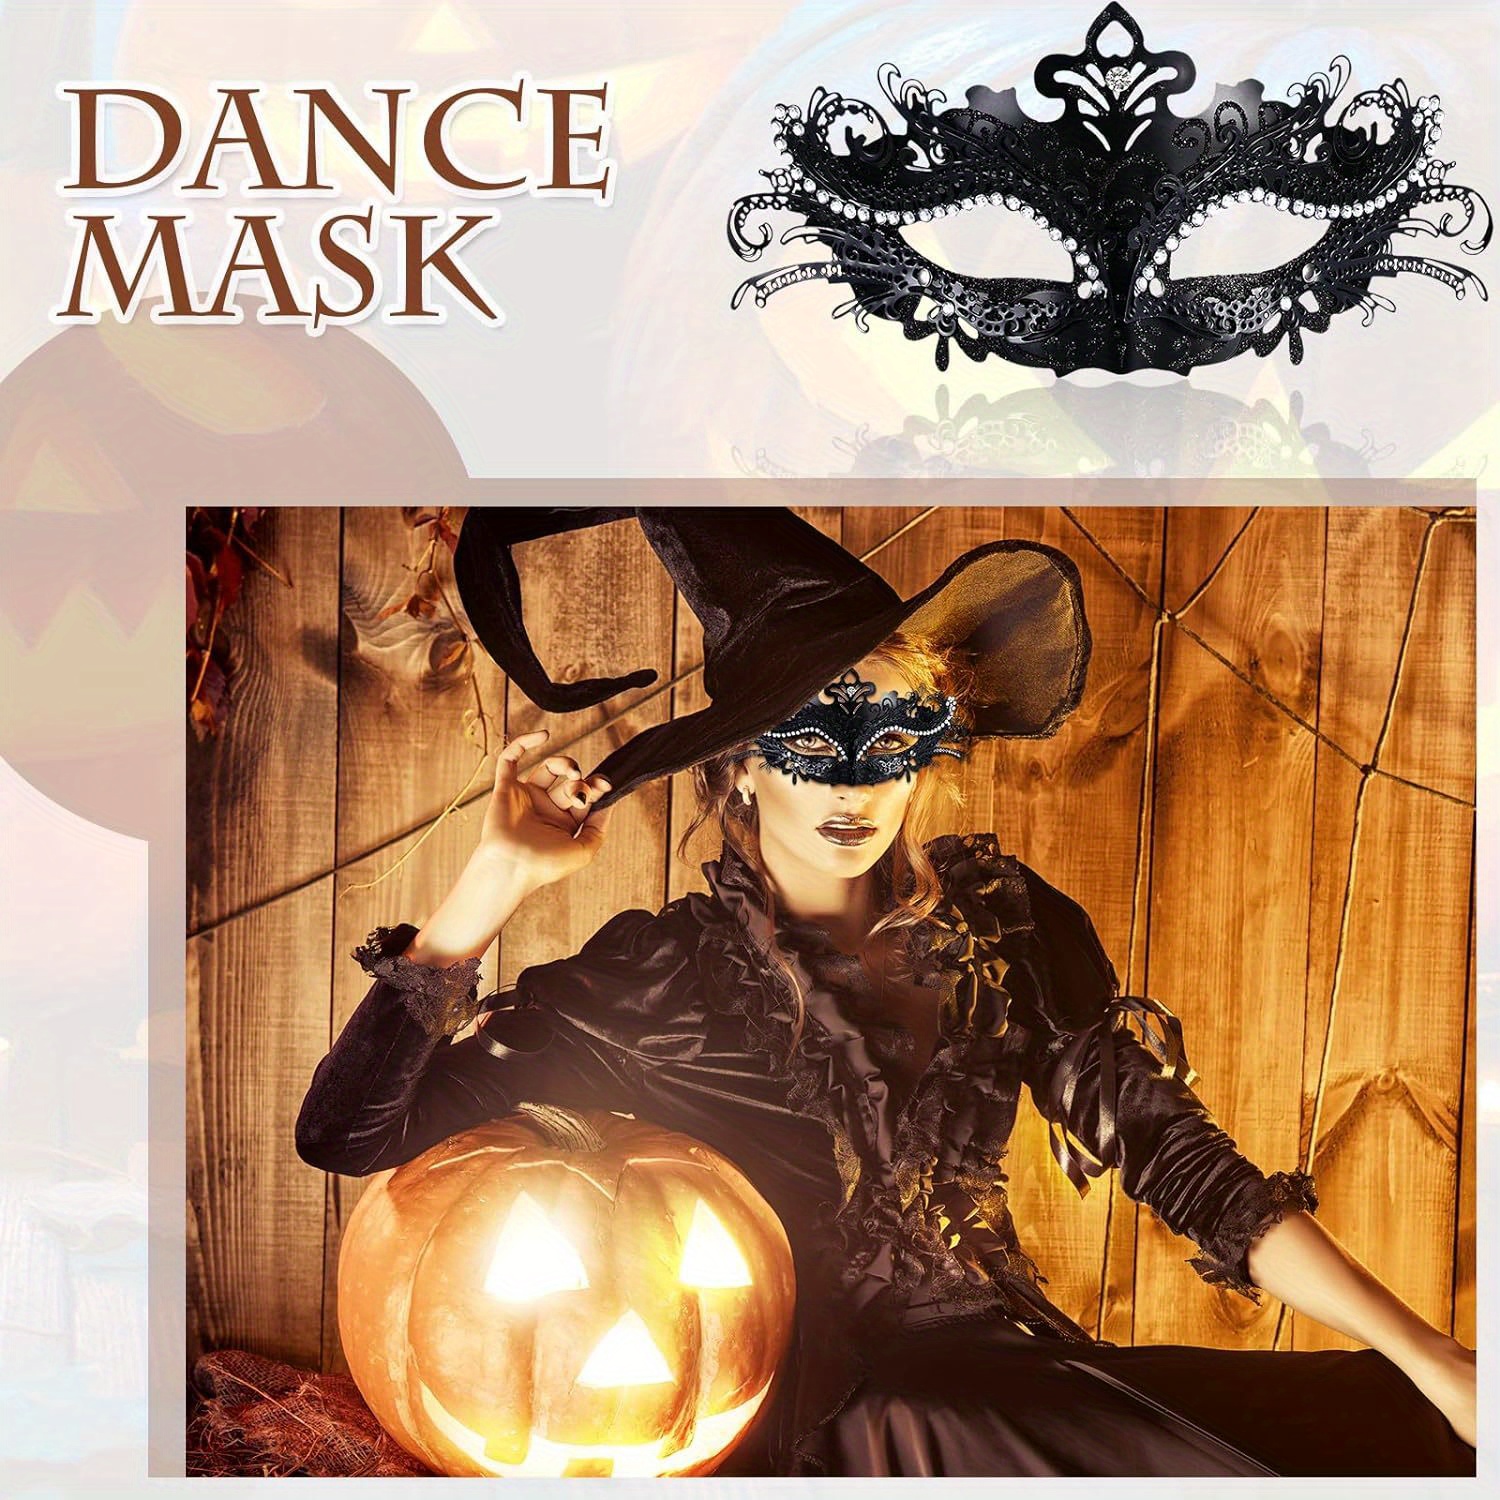 Lace Masquerade Mask for Women, Sexy Lace Mask for Masquerade Party Prom  Ball Dance Halloween Mardi Gras Cosplay Accesorry